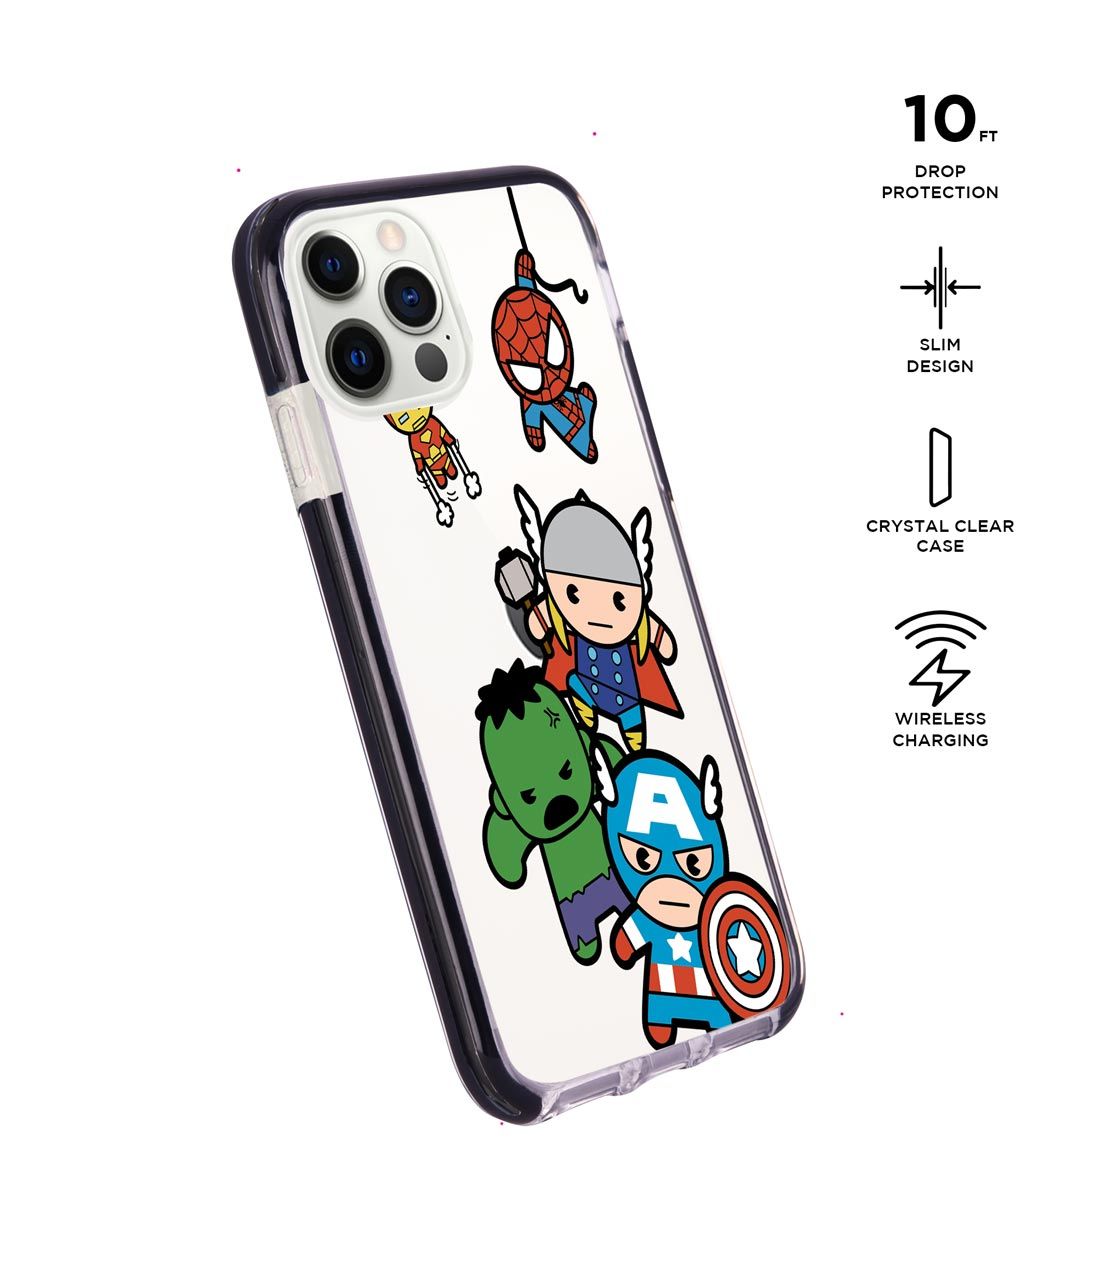 Kawaii Art Marvel Comics - Extreme Case for iPhone 12 Pro Max